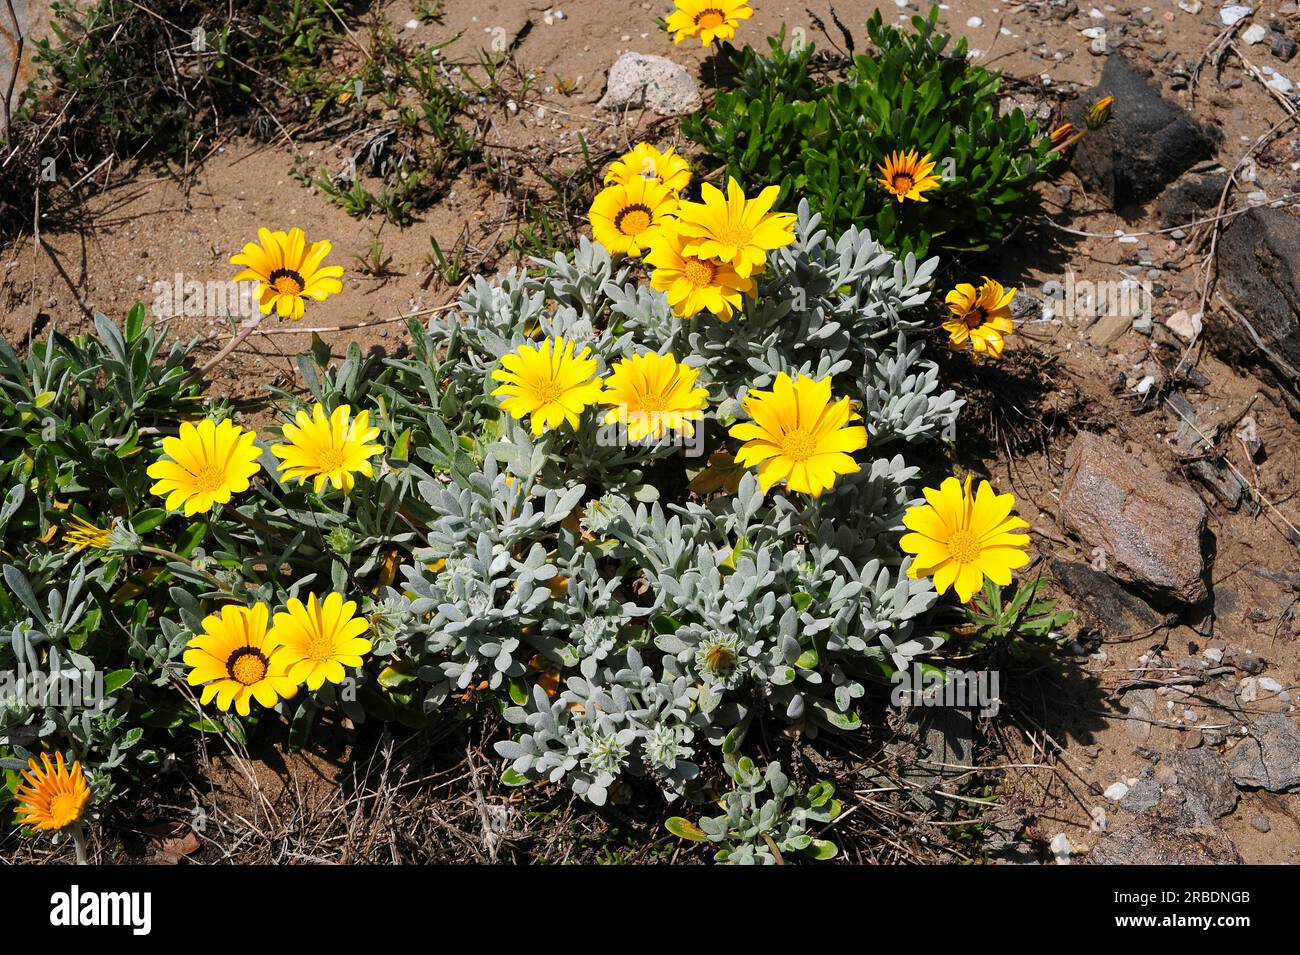 Treasure flower or coastal gazania (Gazania rigens) is a perennial herb native to Southern Africa but naturalized in others countries. Angiosperms. As Stock Photo